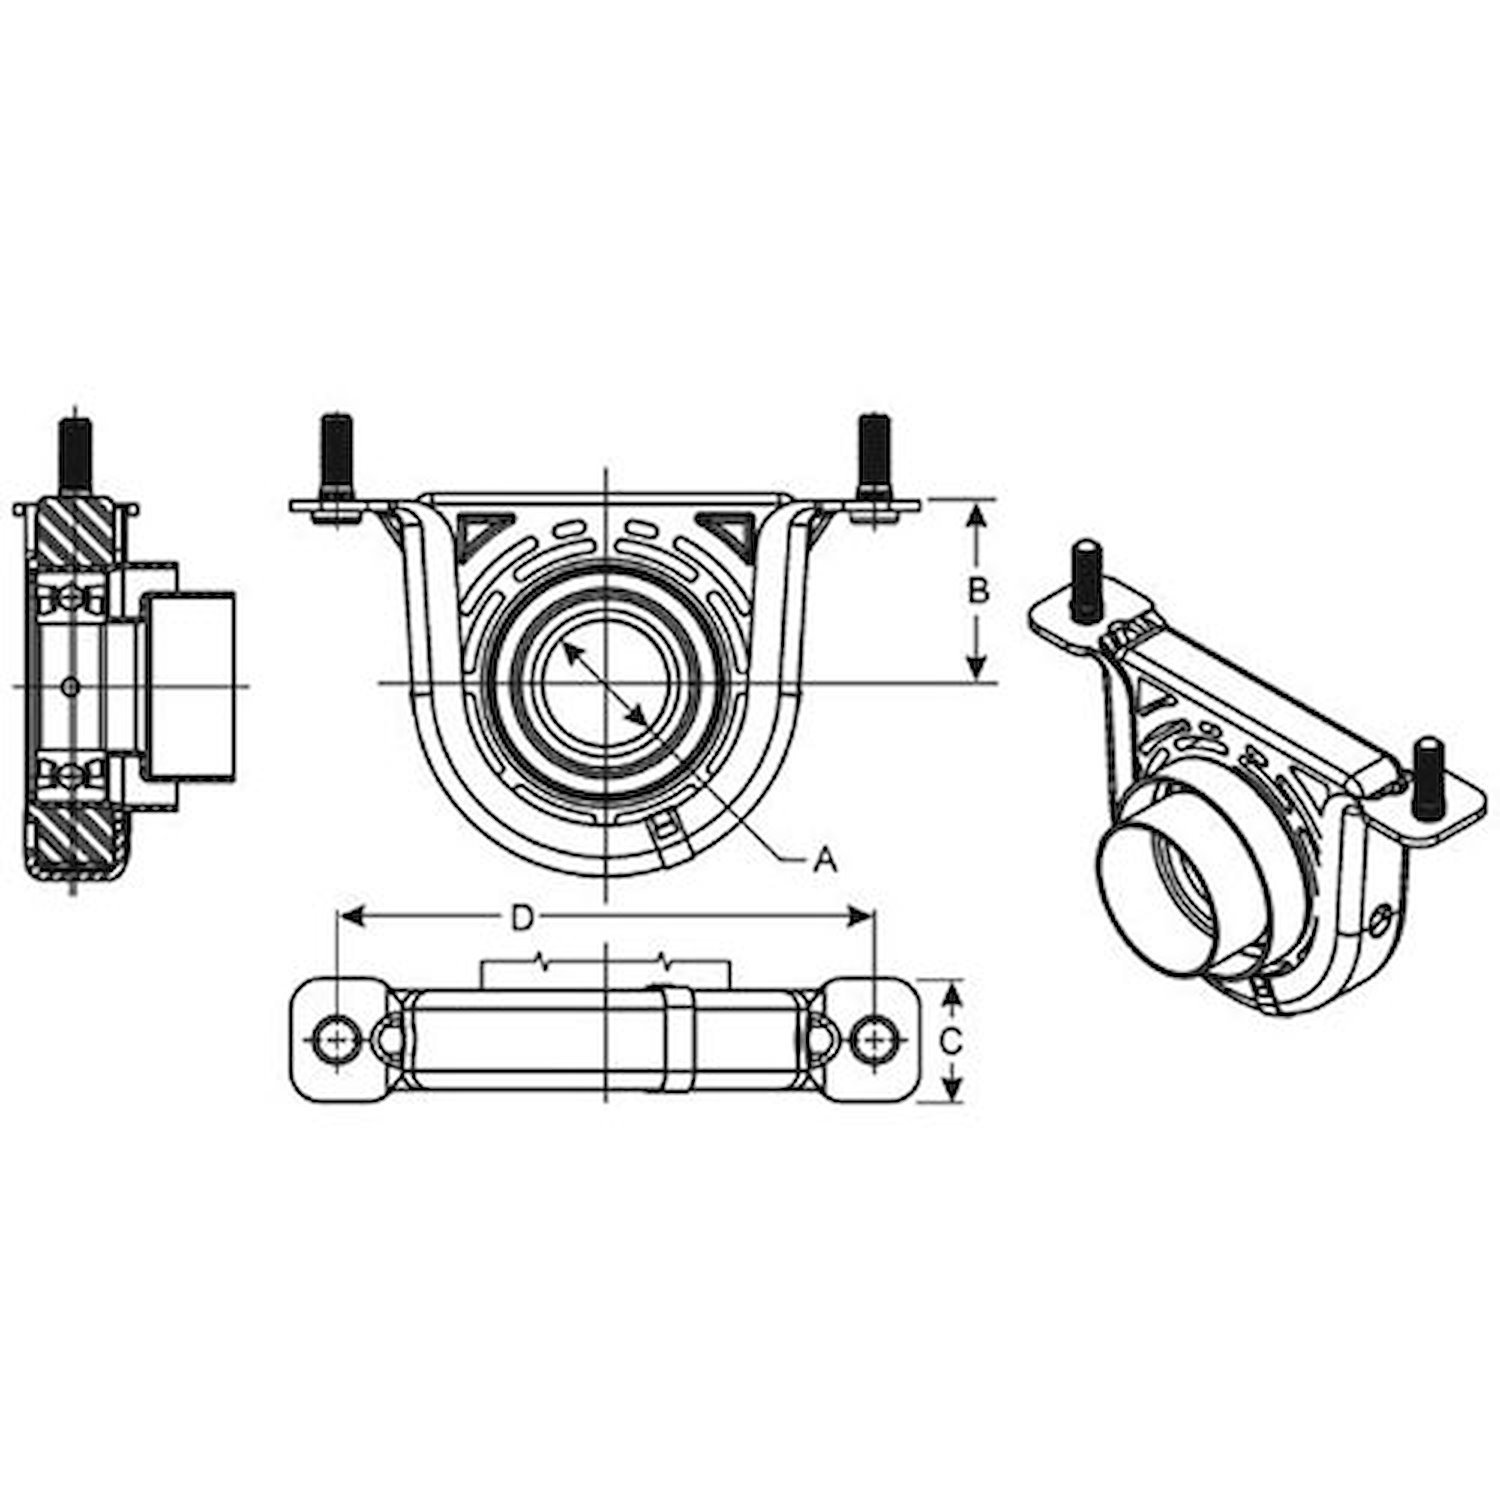 Center Support Bearing ID (A) = 1.574"